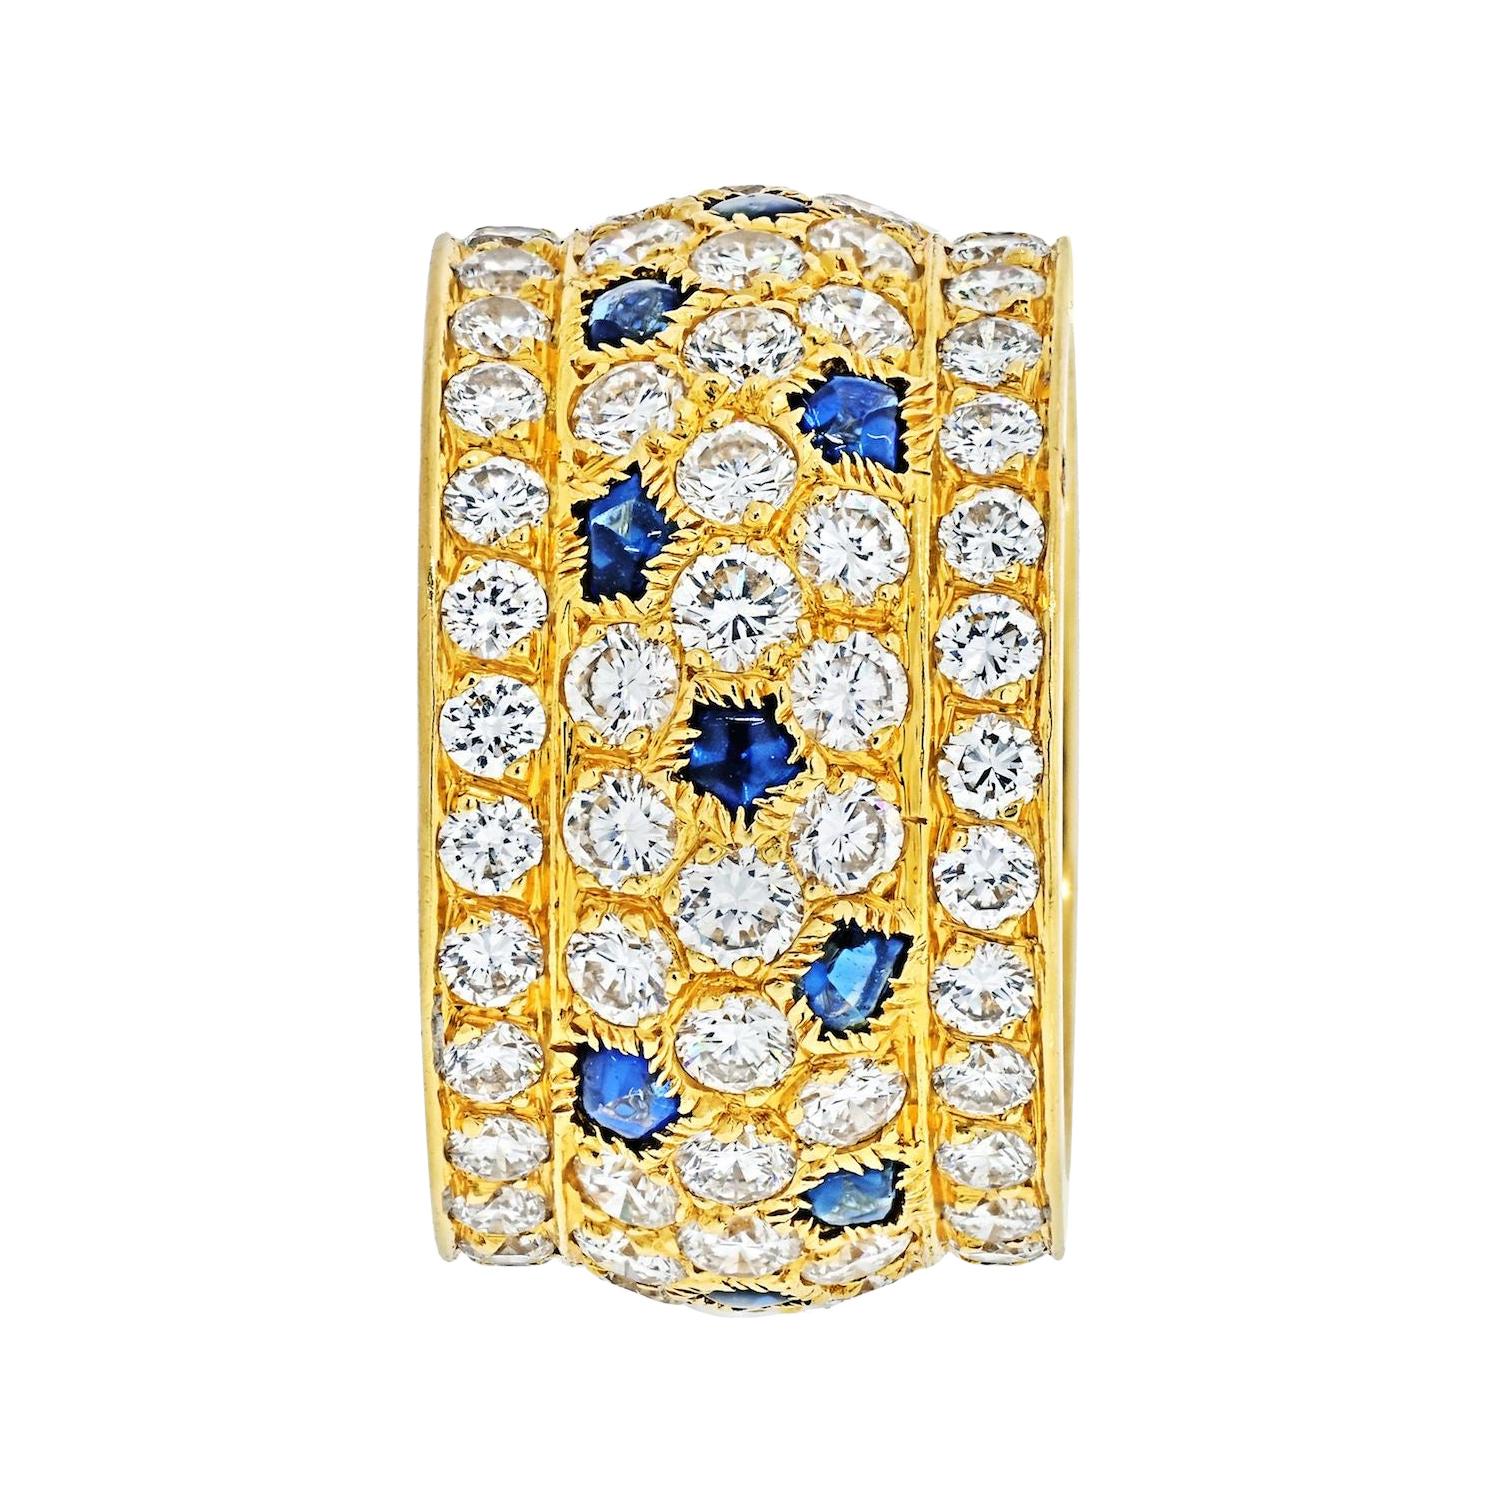 Cartier 18K Yellow Gold Nigeria Diamond Sapphire Ring.
Diamond and sapphire 'Nigeria' ring, Cartier, France. 
The band ring set with round diamonds weighing approximately 5.60 carats, with buff-top sapphire accents, 
Ring size is 6.5.
European size